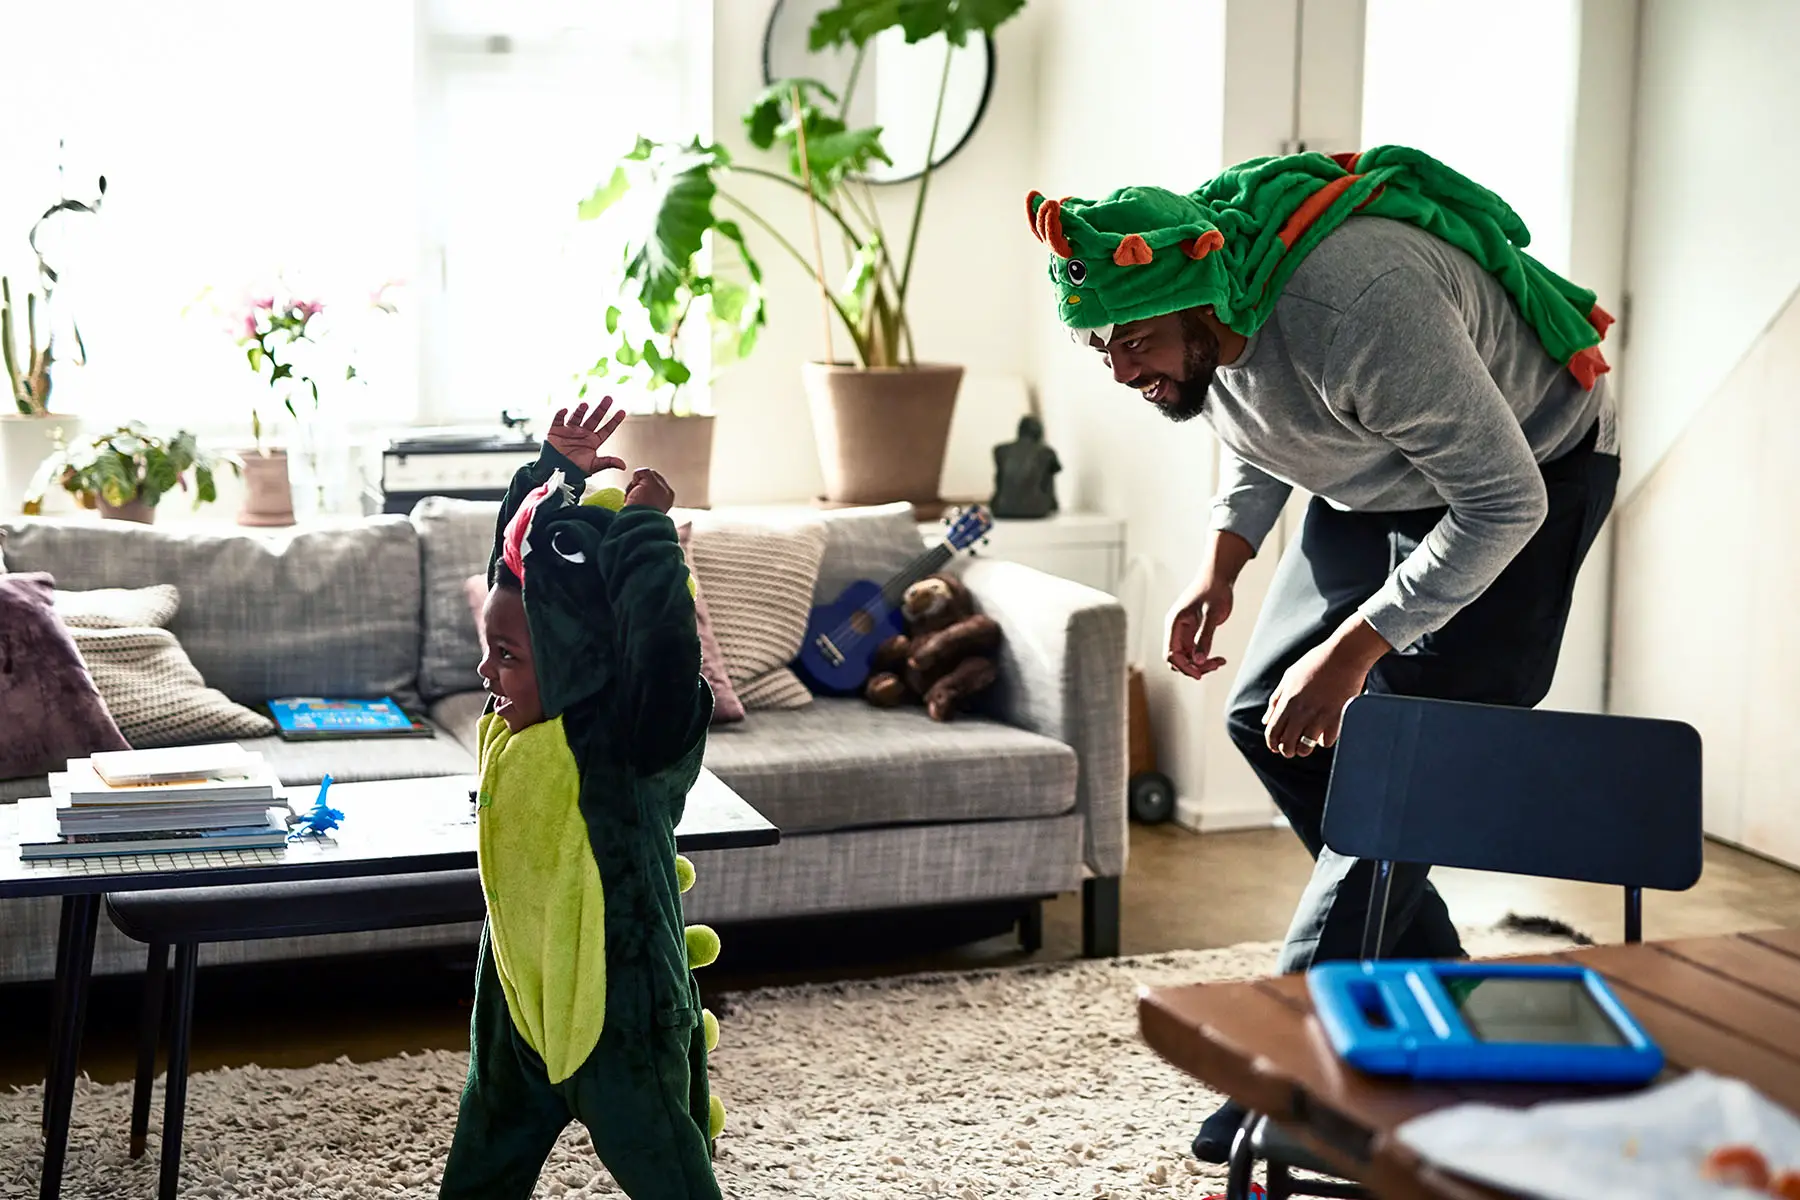 Young boy wearing dinosaur costume being chased by dad, half in costume, at home.